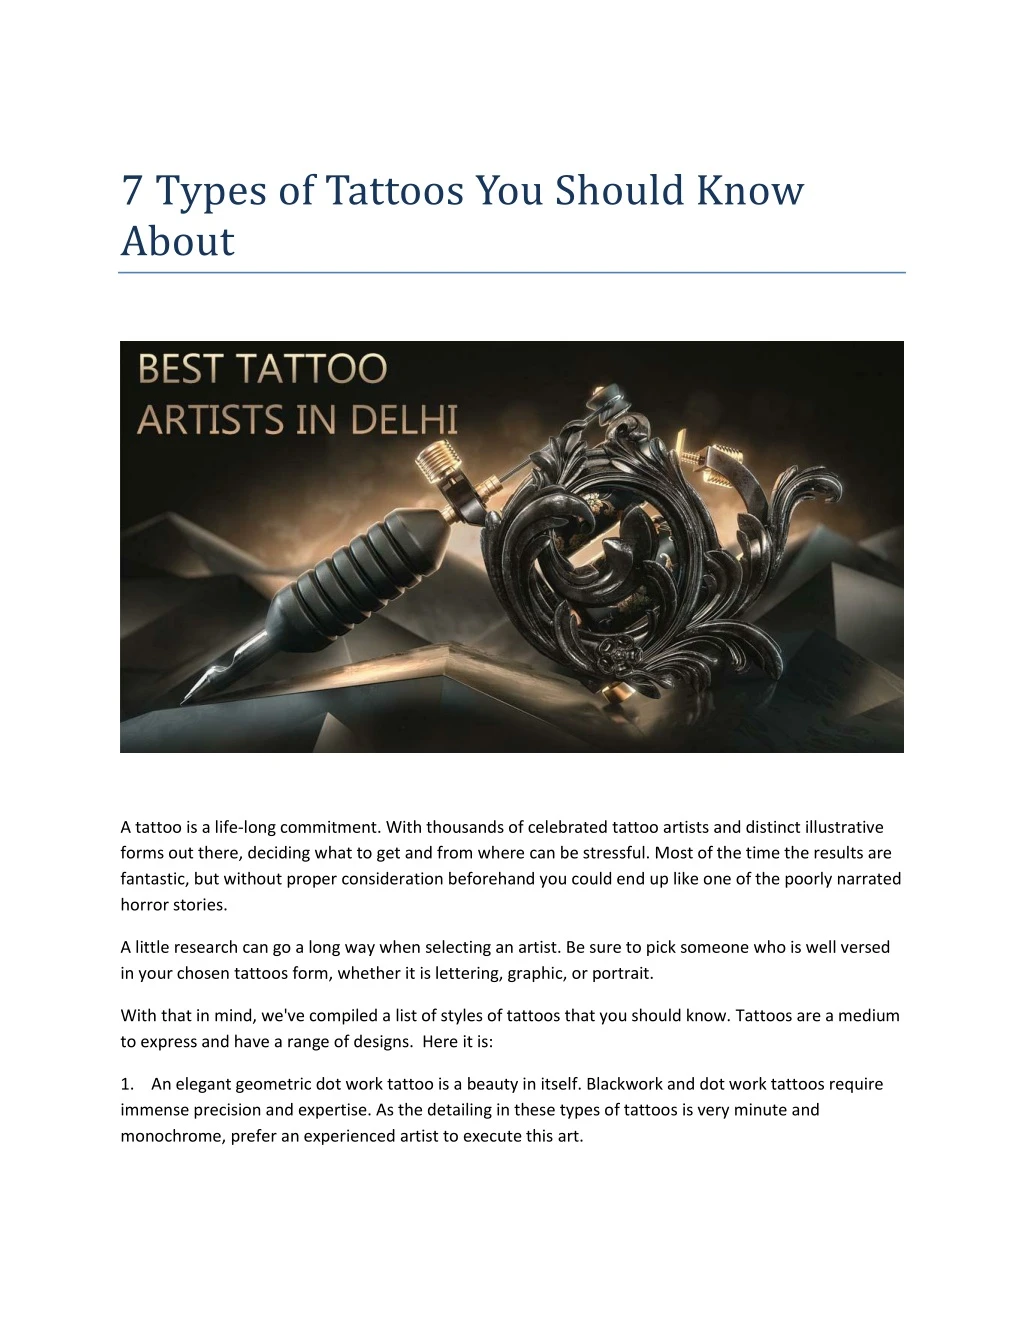 7 types of tattoos you should know about